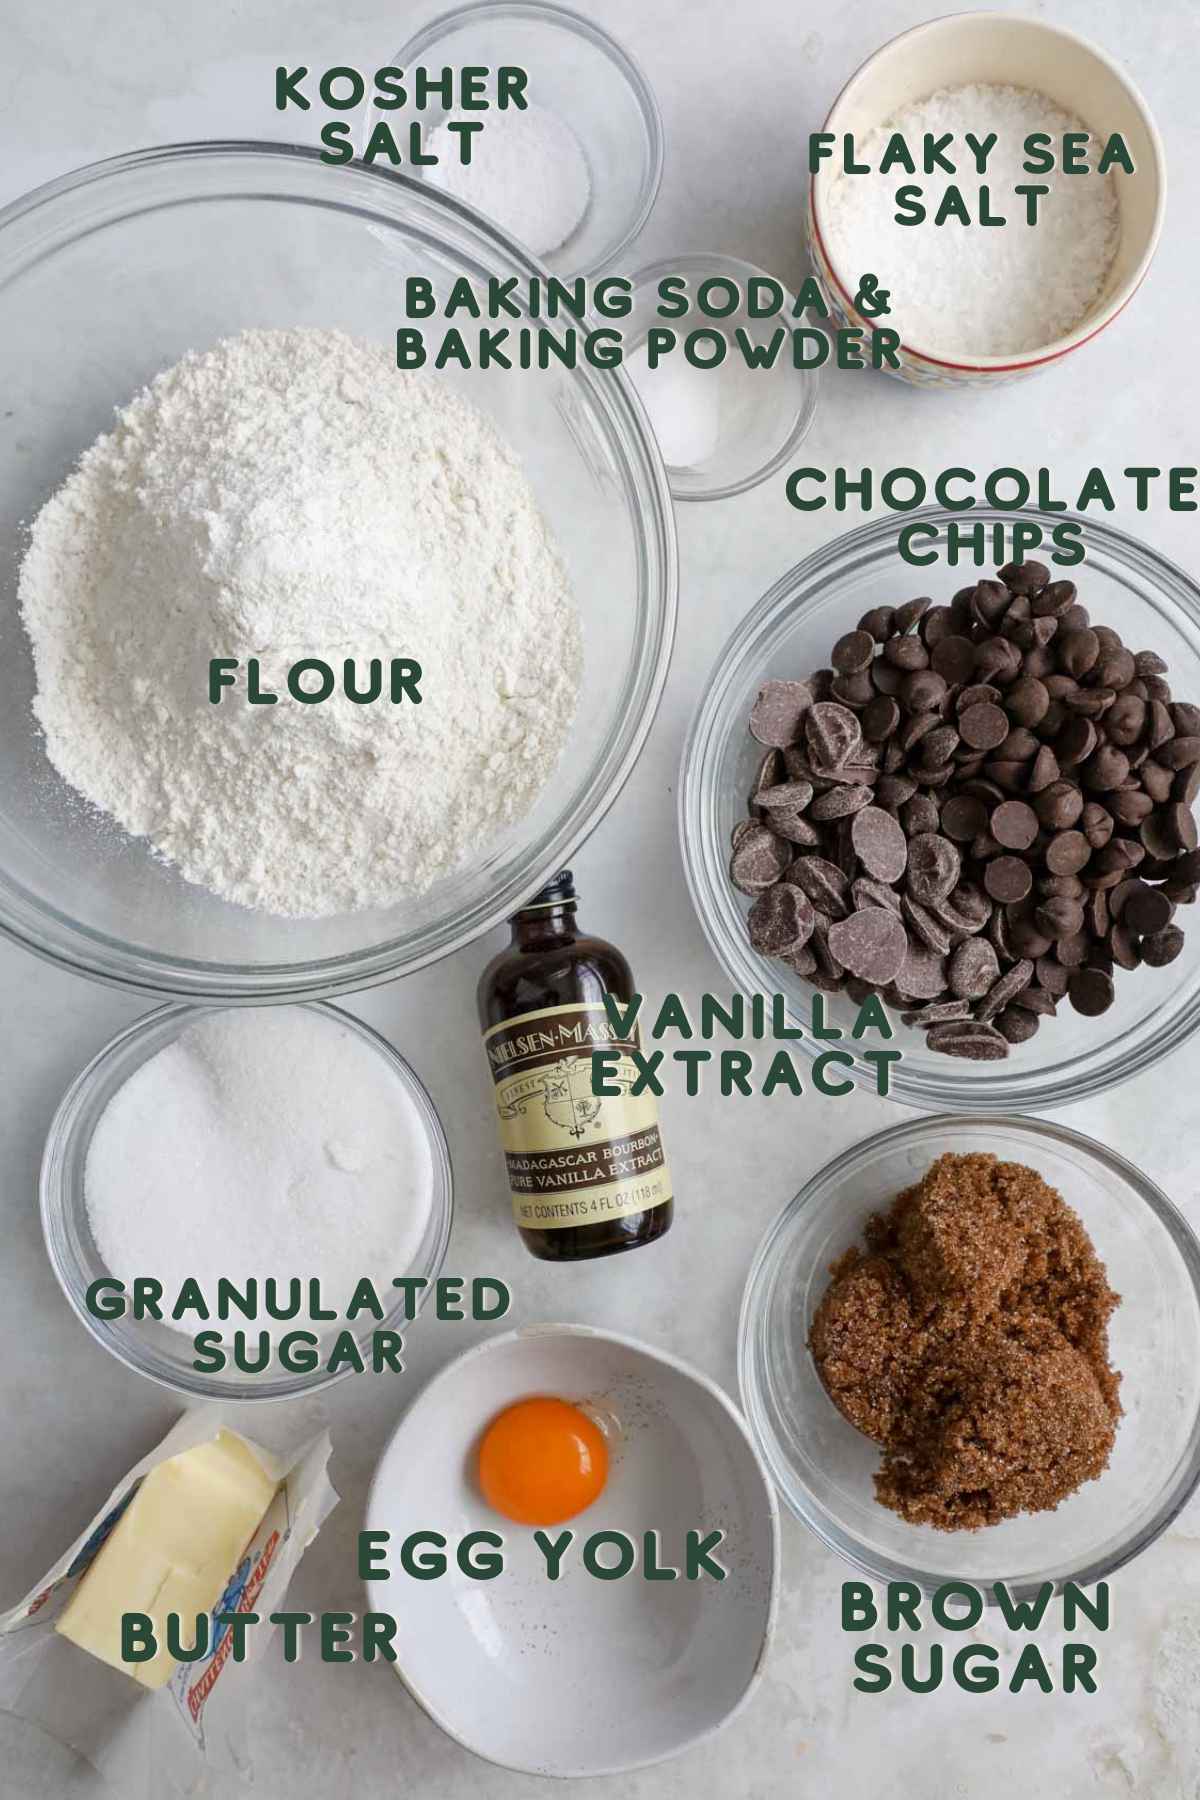 Ingredients to make small batch chocolate chip cookies, including flour, vanilla, chocolate, egg yolk, butter, brown sugar, granulated sugar, baking soda and powder, and kosher salt.